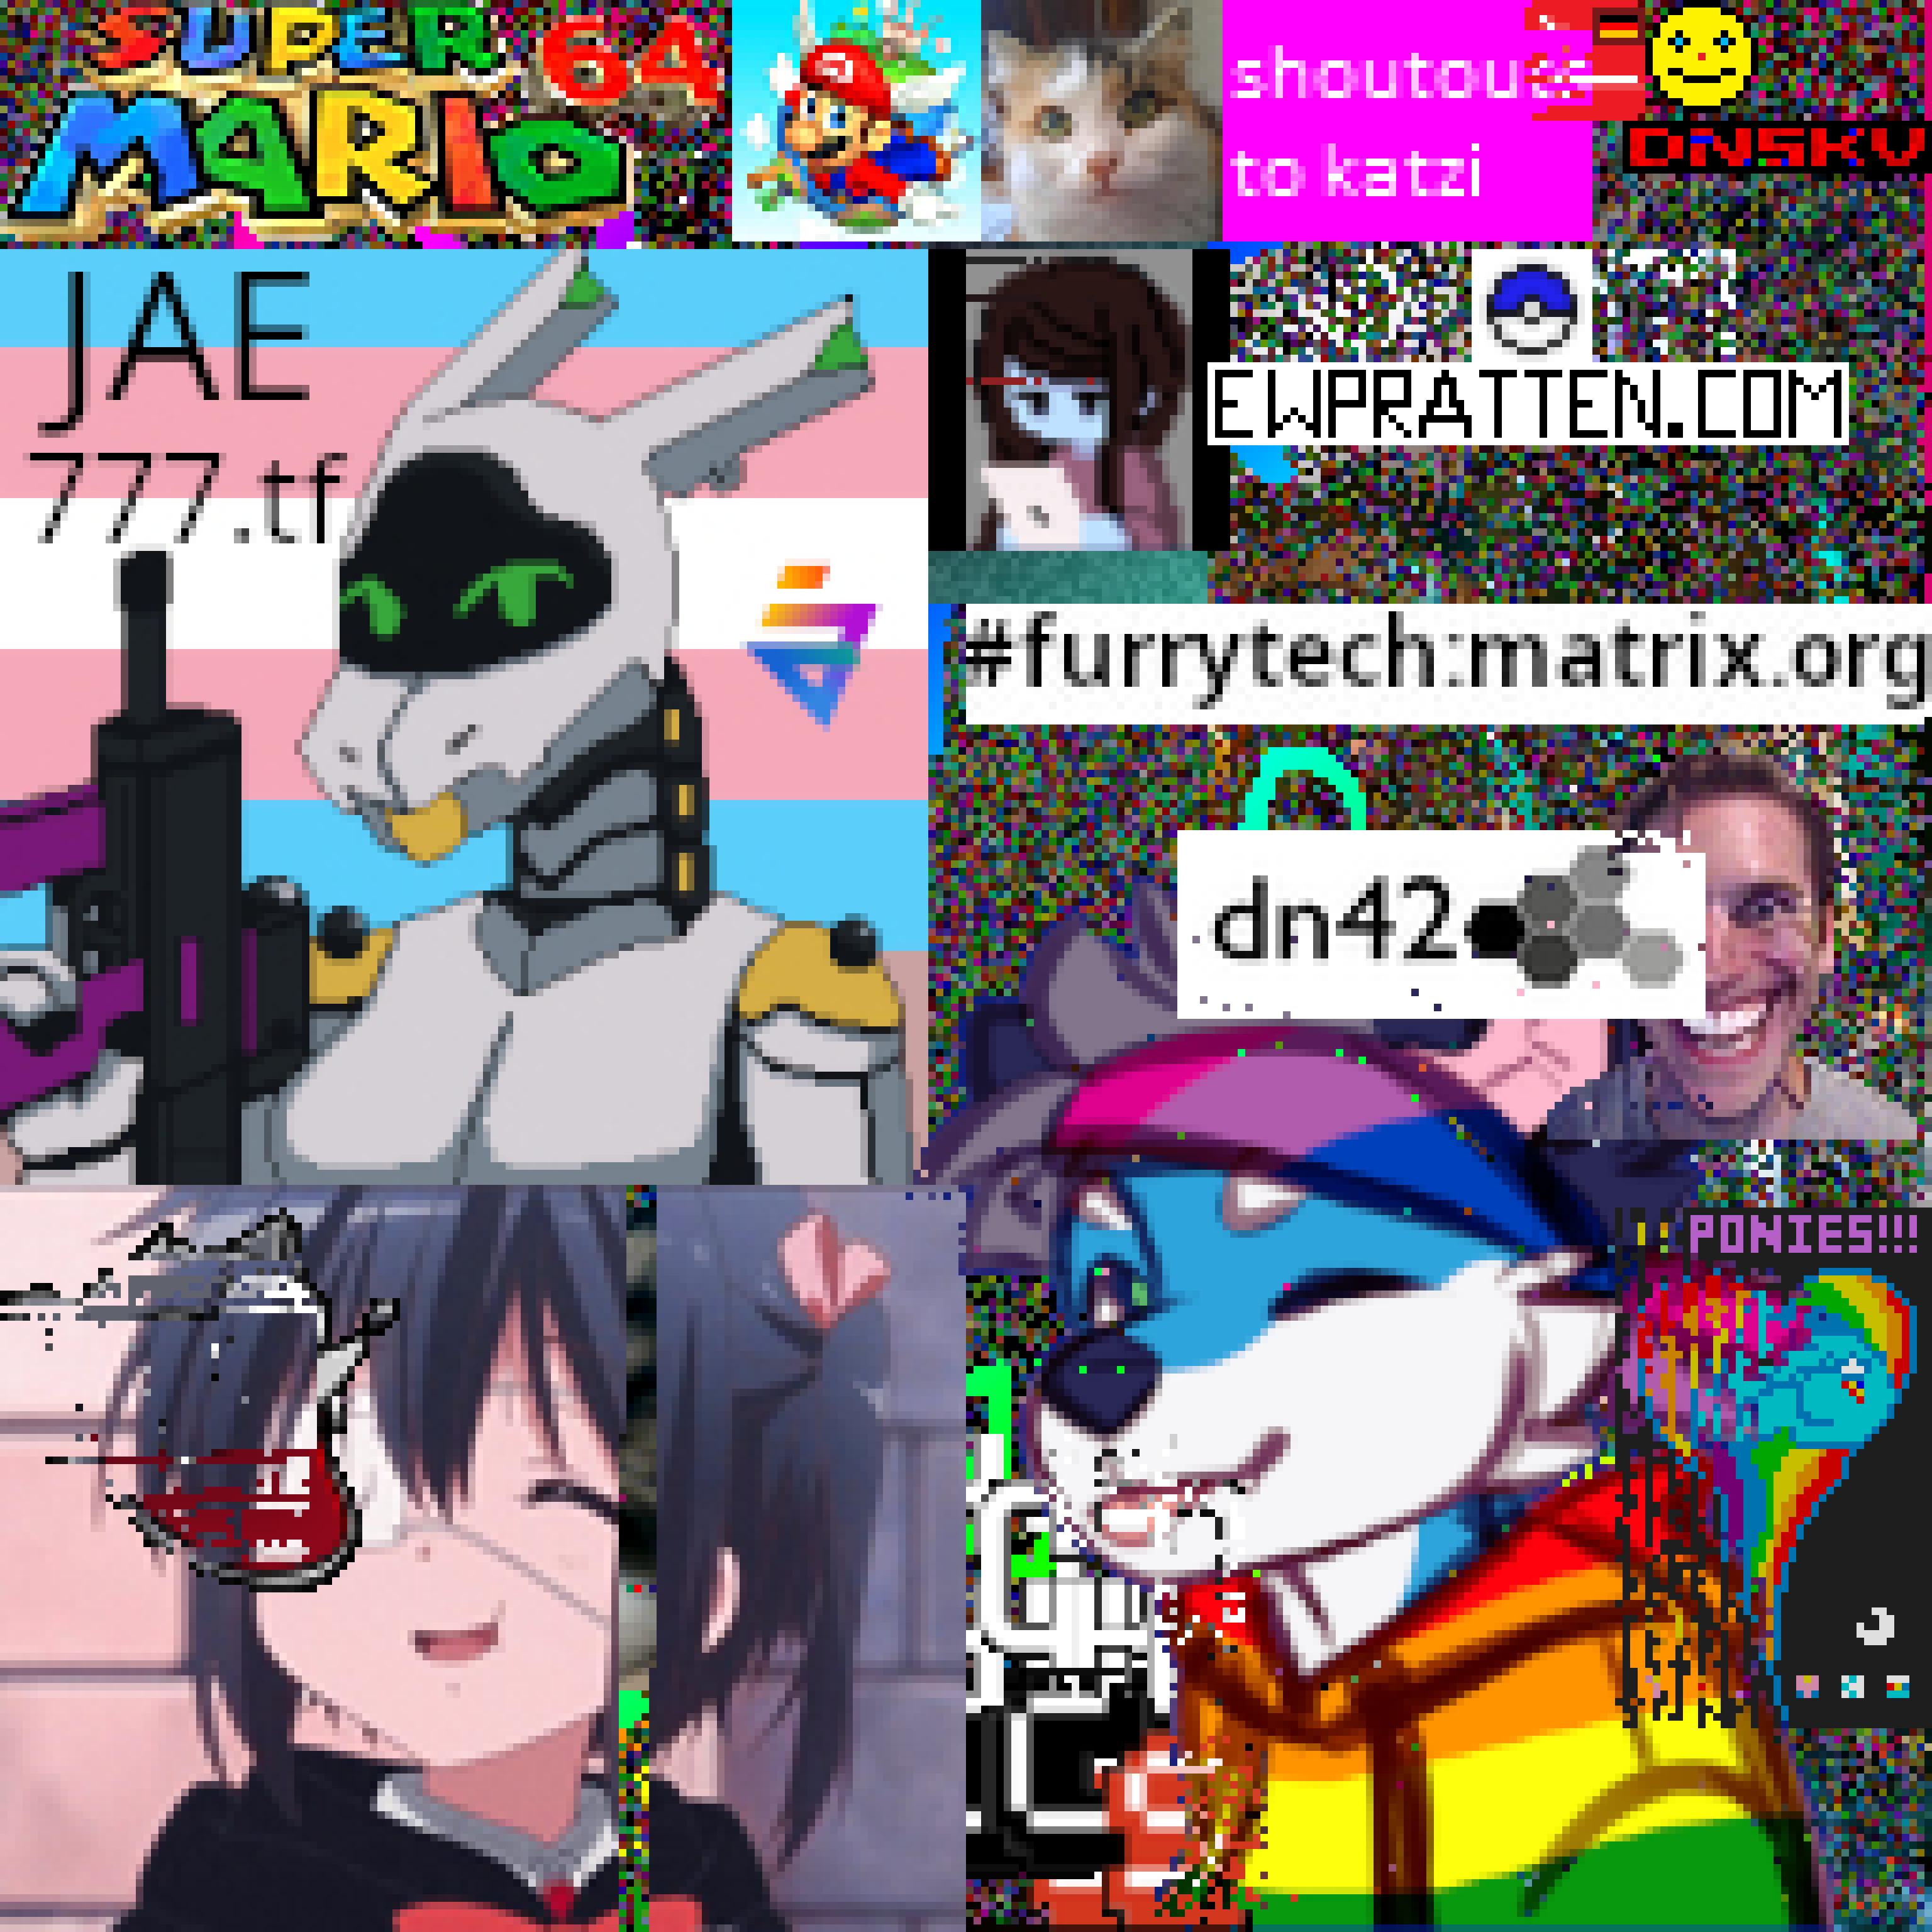 Pixelated canvas with: a Super Mario 64 logo, a big trans flag with Jae the Synth, an image of a husky in a LGBT hoodie and various texts and smaller images around.